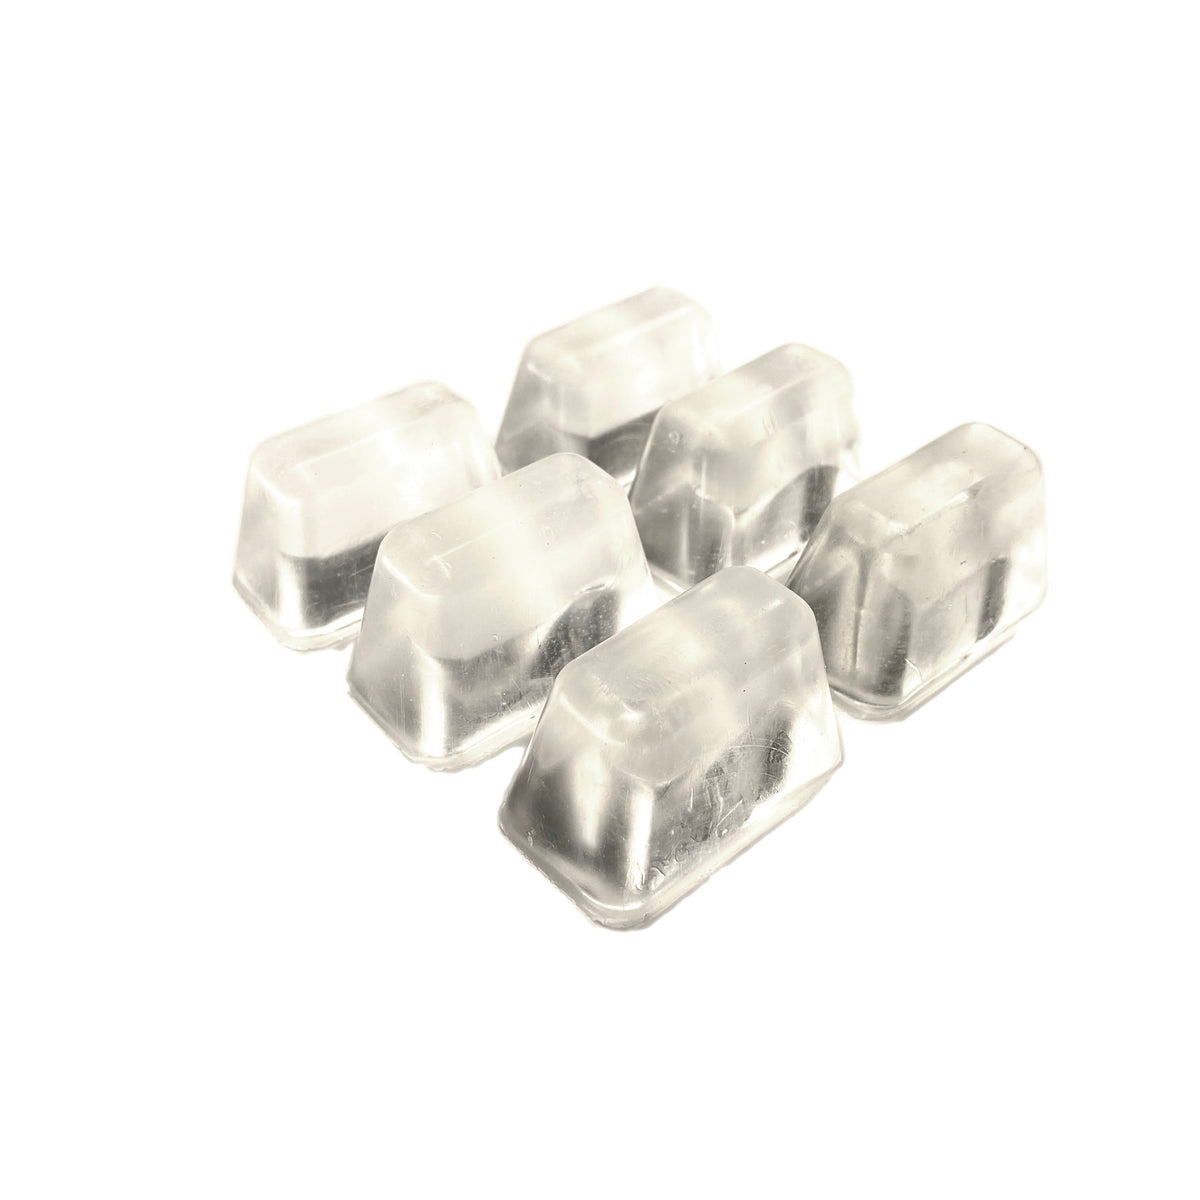 Floating Silicone Rubber Ice Cube Prop - 6 PIECES - 6 Pieces